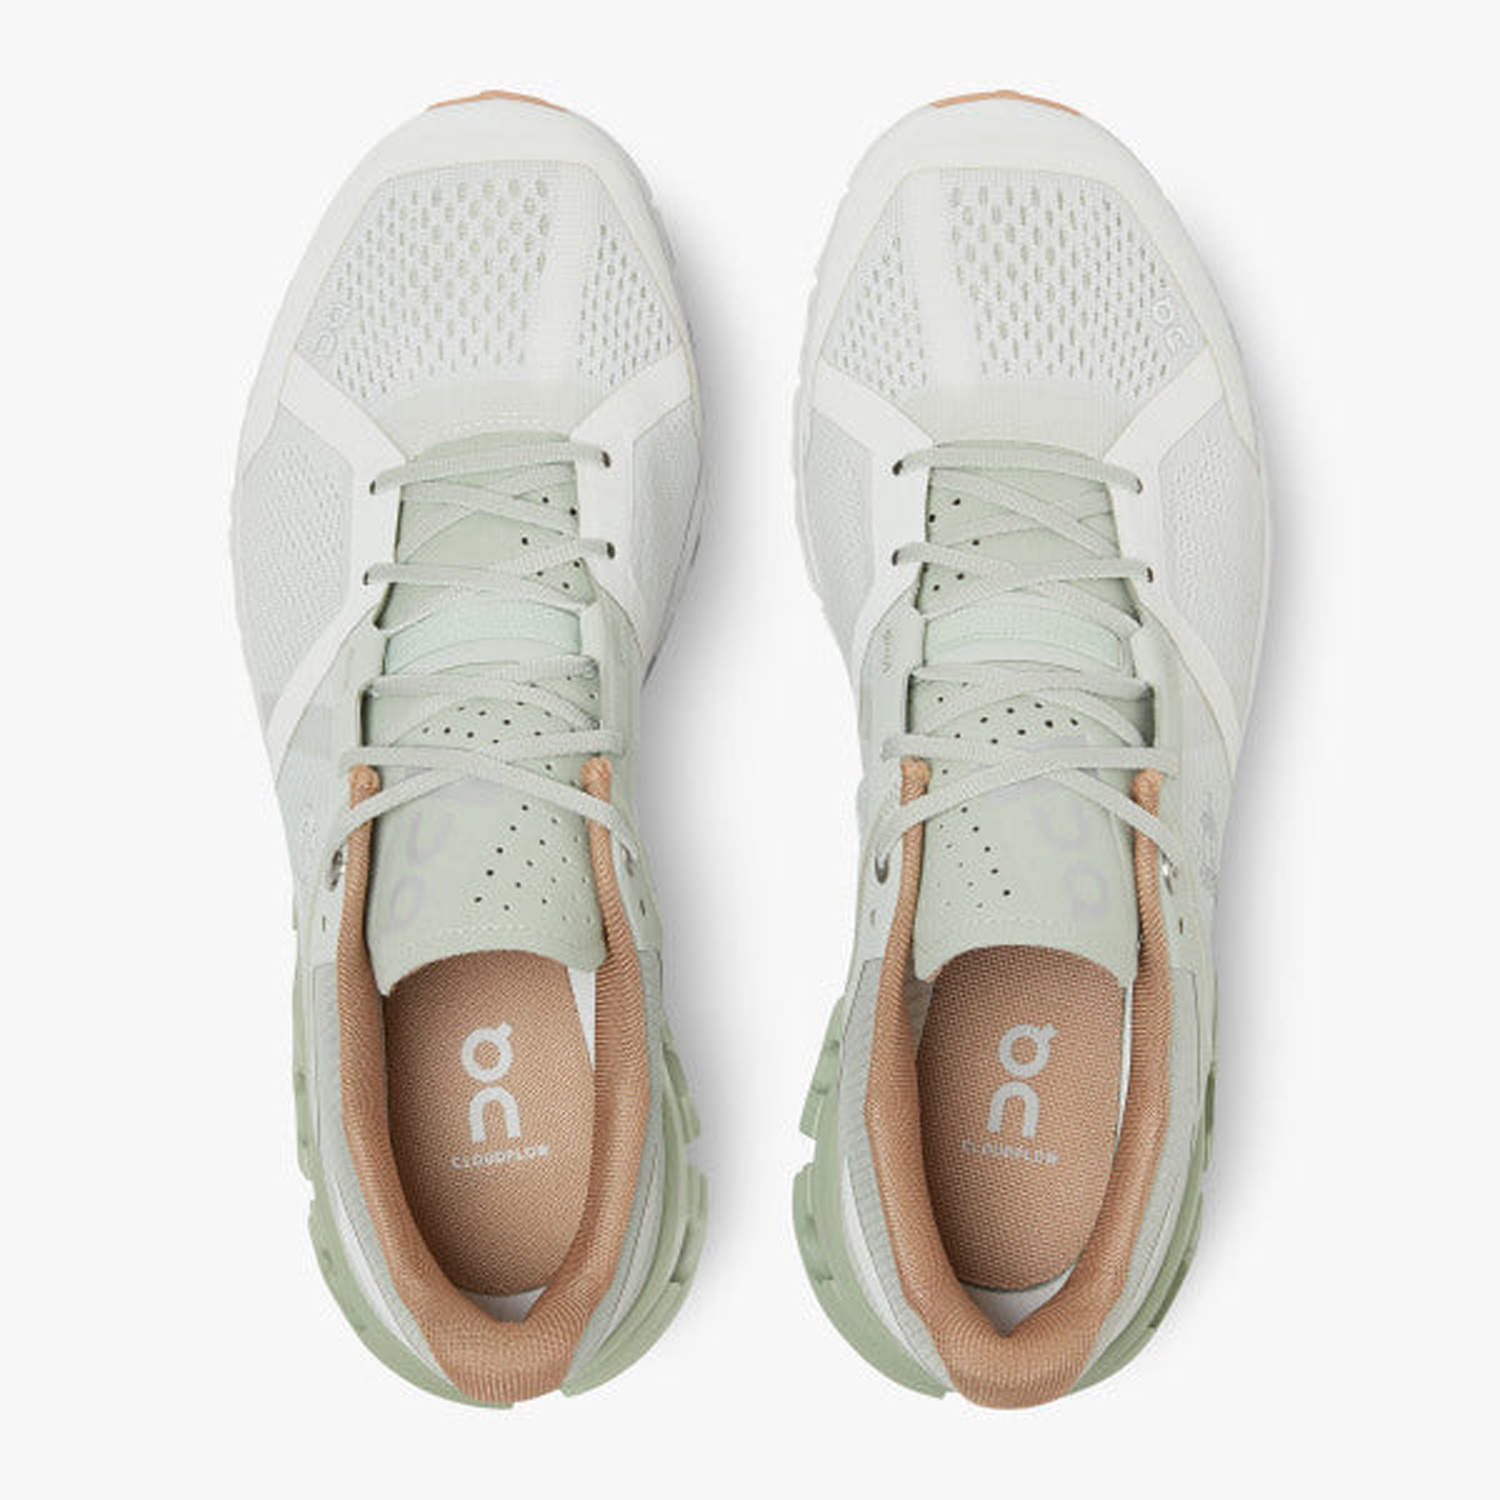 top view of The Women's On Cloudflow running shoes in the colour aloe/white